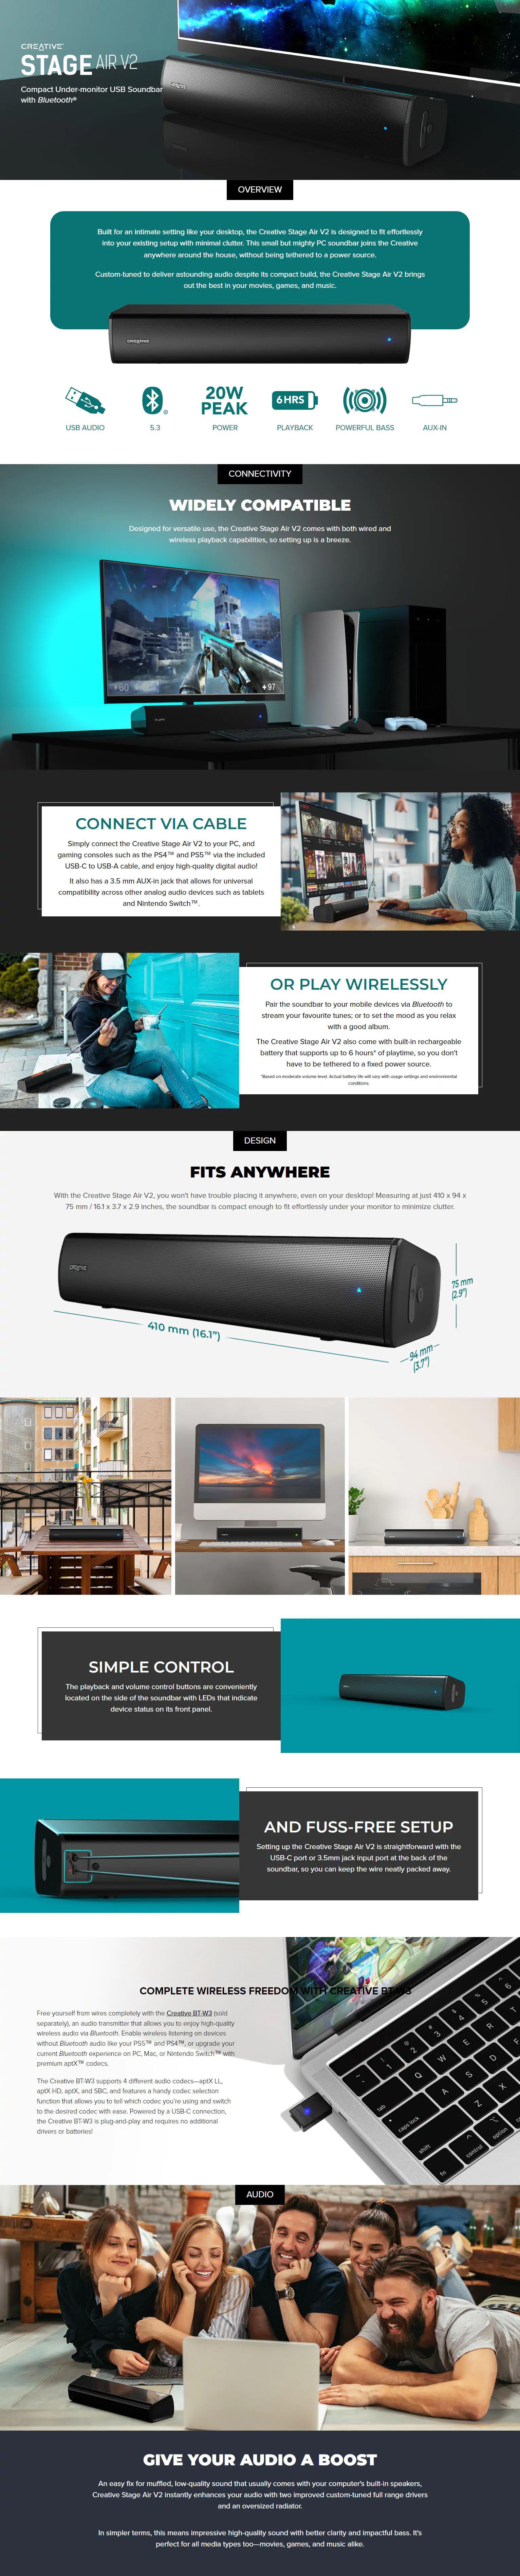 A large marketing image providing additional information about the product Creative Stage AIR V2 Bluetooth Under-Monitor Speaker - Black - Additional alt info not provided